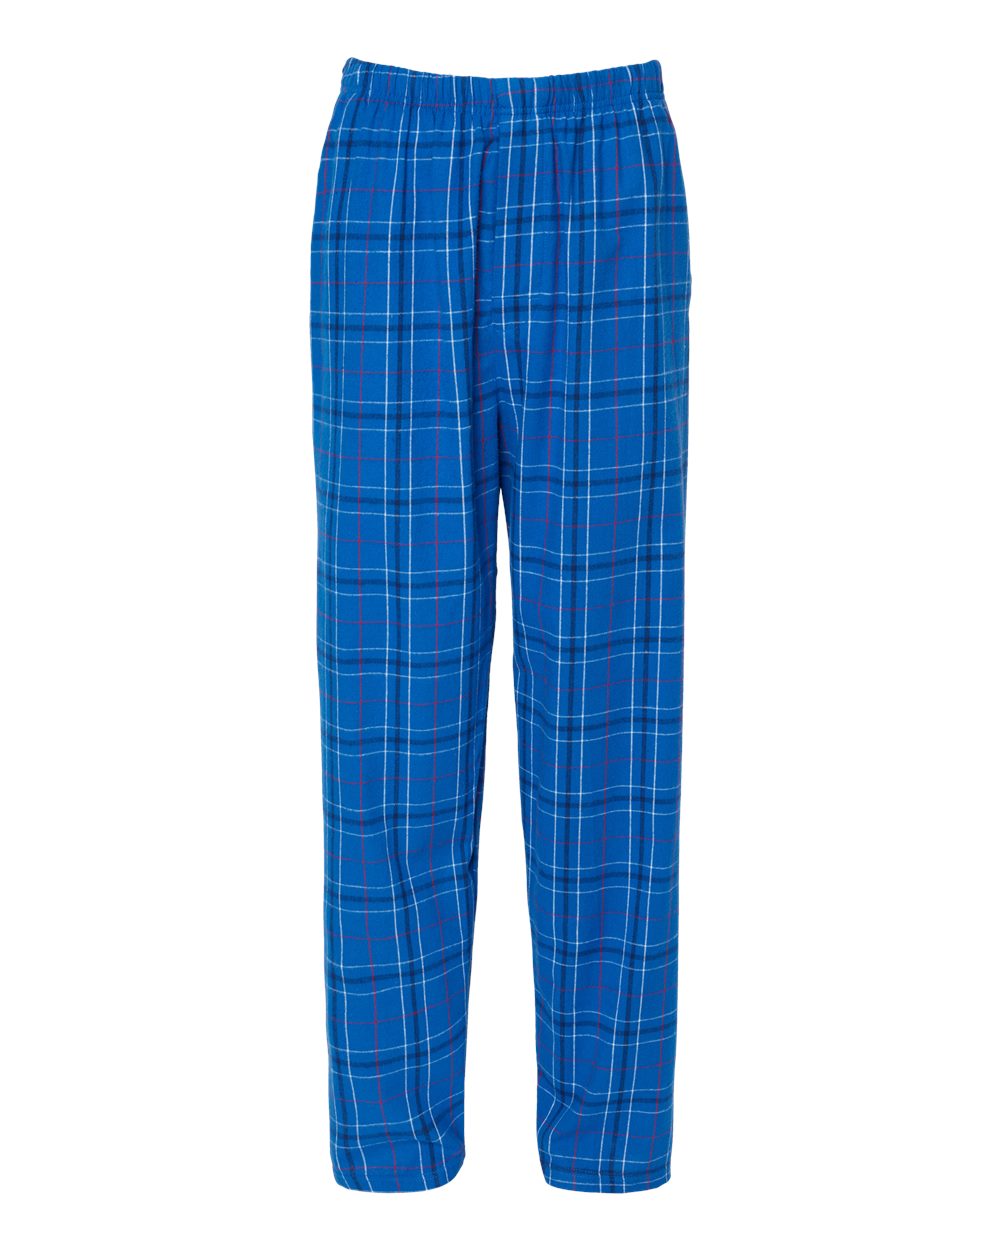 Boxercraft Unisex Flannel Pants Royal Field Day Flannel Pants with Custom Text